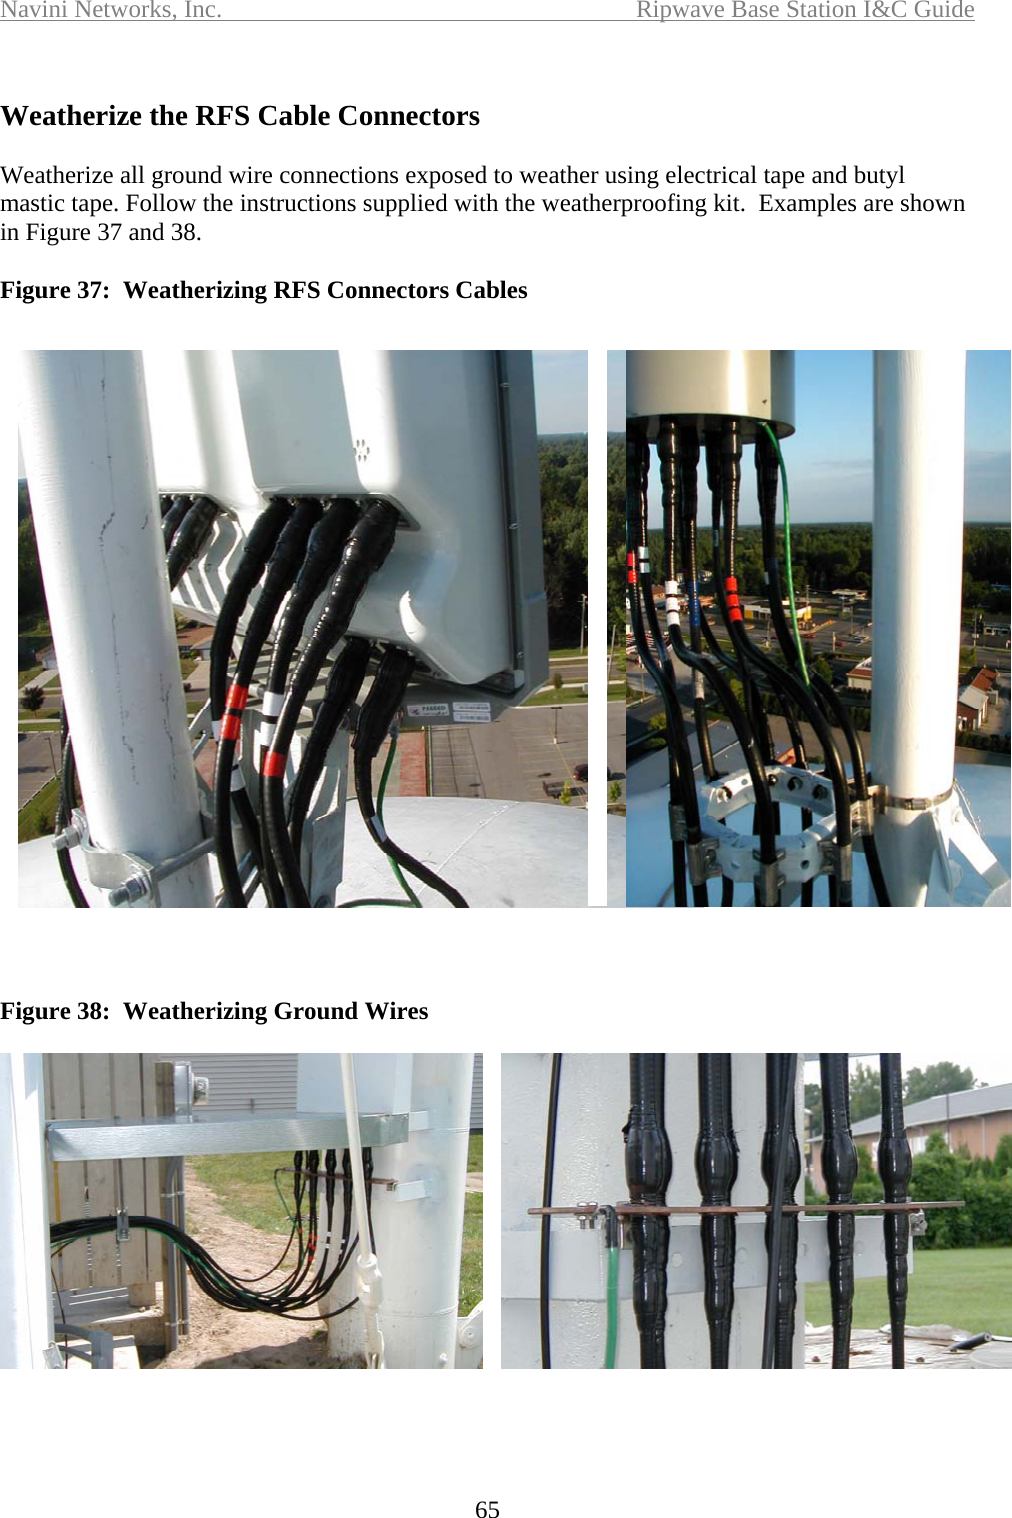 Navini Networks, Inc.  Ripwave Base Station I&amp;C Guide  65  Weatherize the RFS Cable Connectors  Weatherize all ground wire connections exposed to weather using electrical tape and butyl mastic tape. Follow the instructions supplied with the weatherproofing kit.  Examples are shown in Figure 37 and 38.  Figure 37:  Weatherizing RFS Connectors Cables     Figure 38:  Weatherizing Ground Wires   